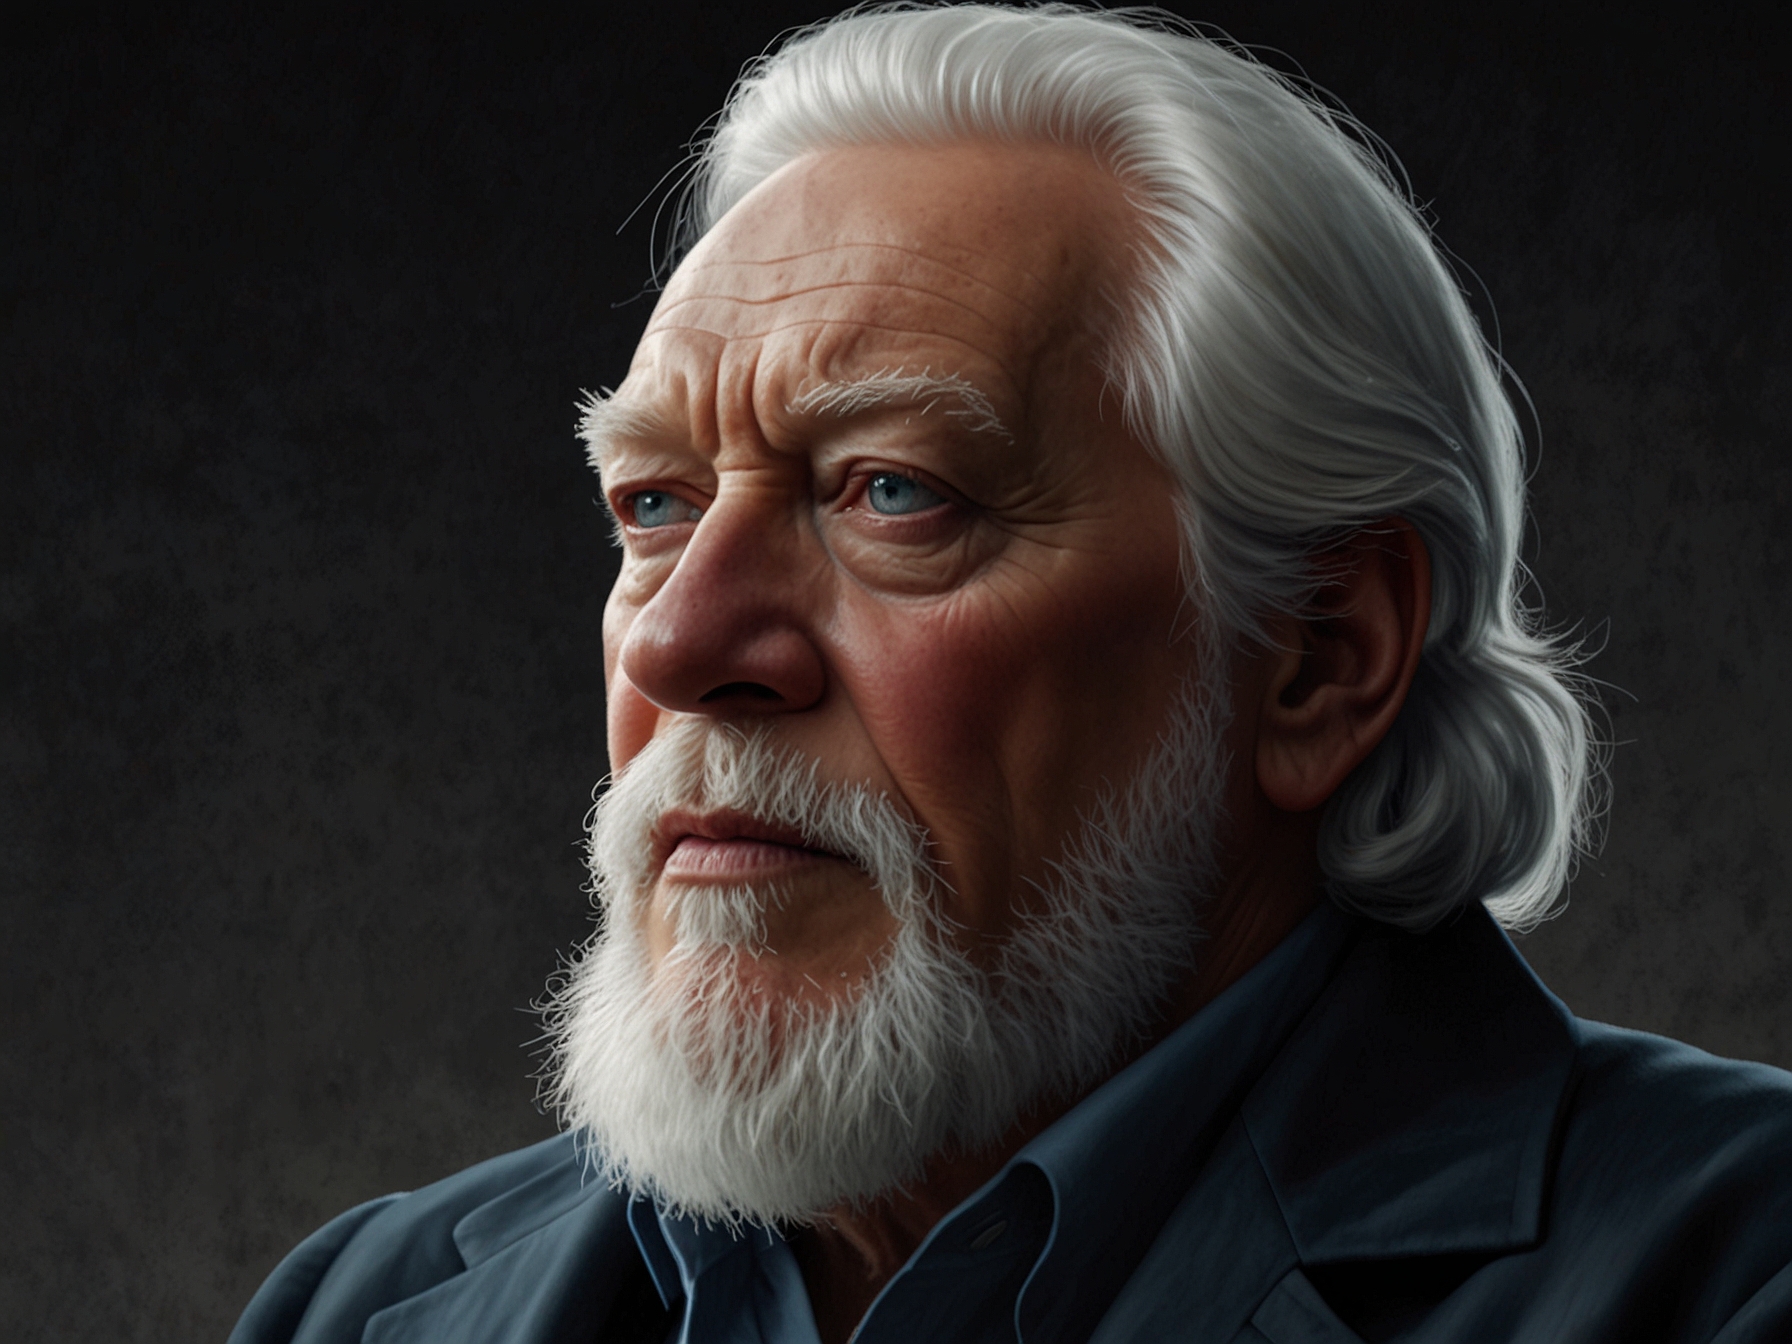 A portrait of Donald Sutherland as President Snow in 'The Hunger Games' series, capturing the chilling realism he brought to the dystopian antagonist, earning praise from fans and critics.